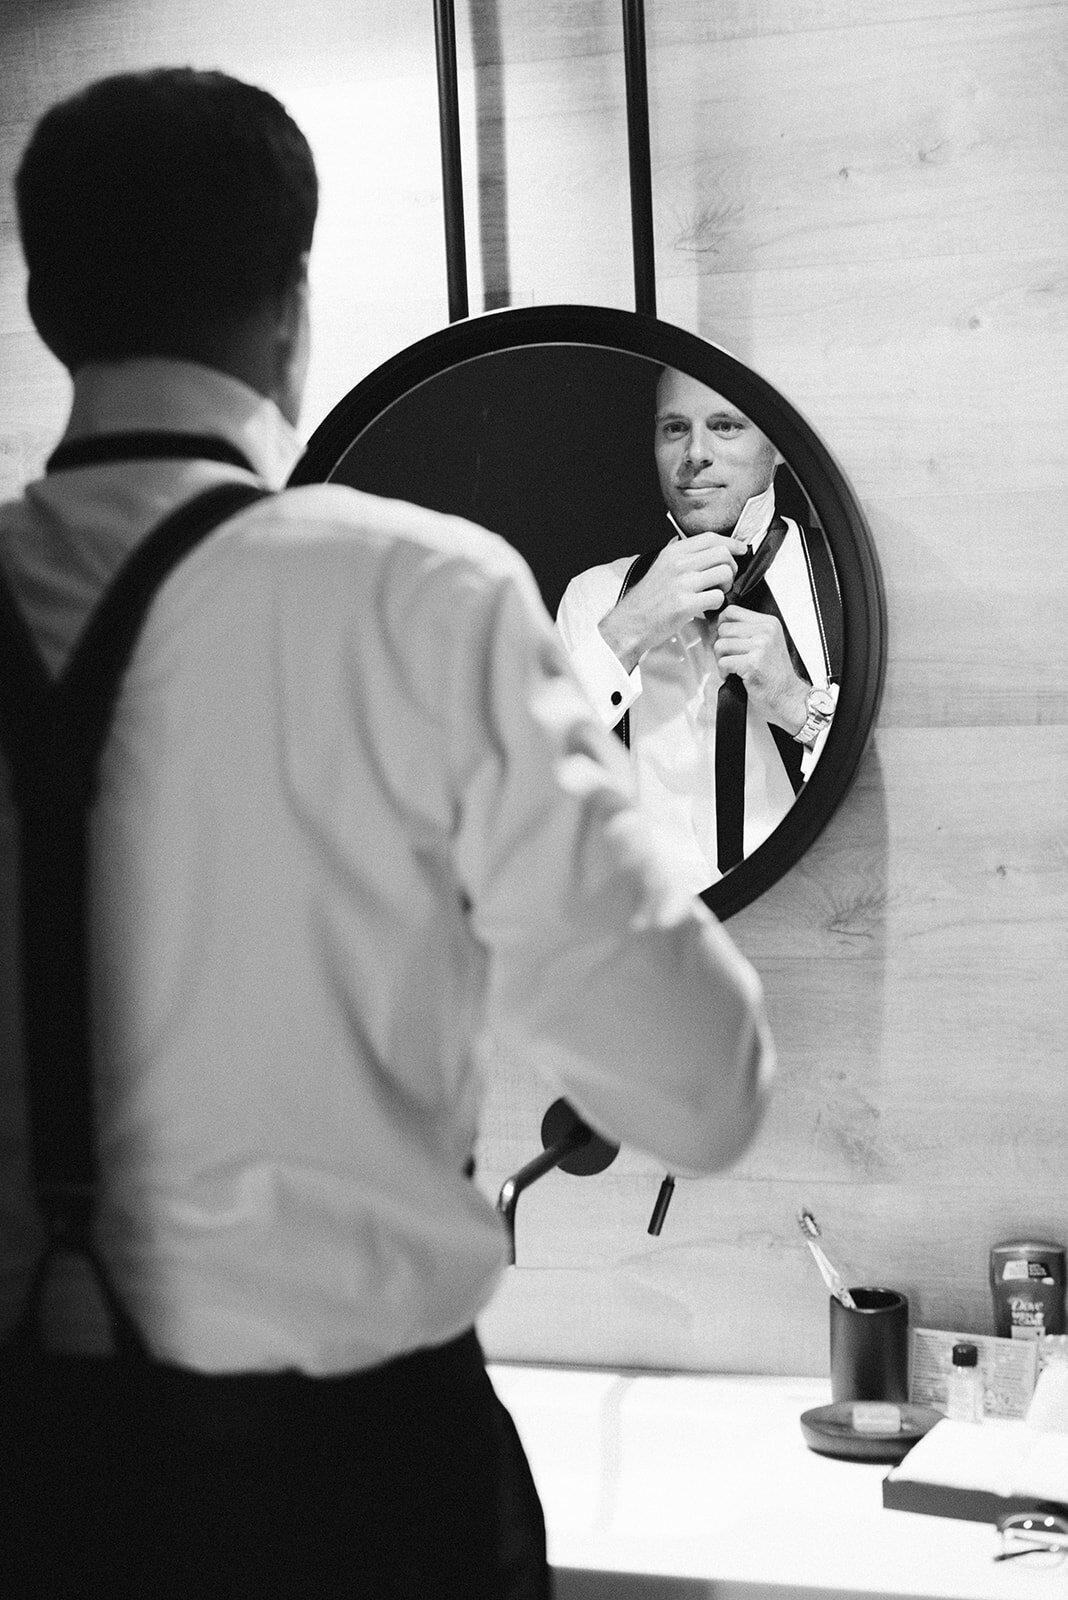 The groom getting ready and fixing his tie